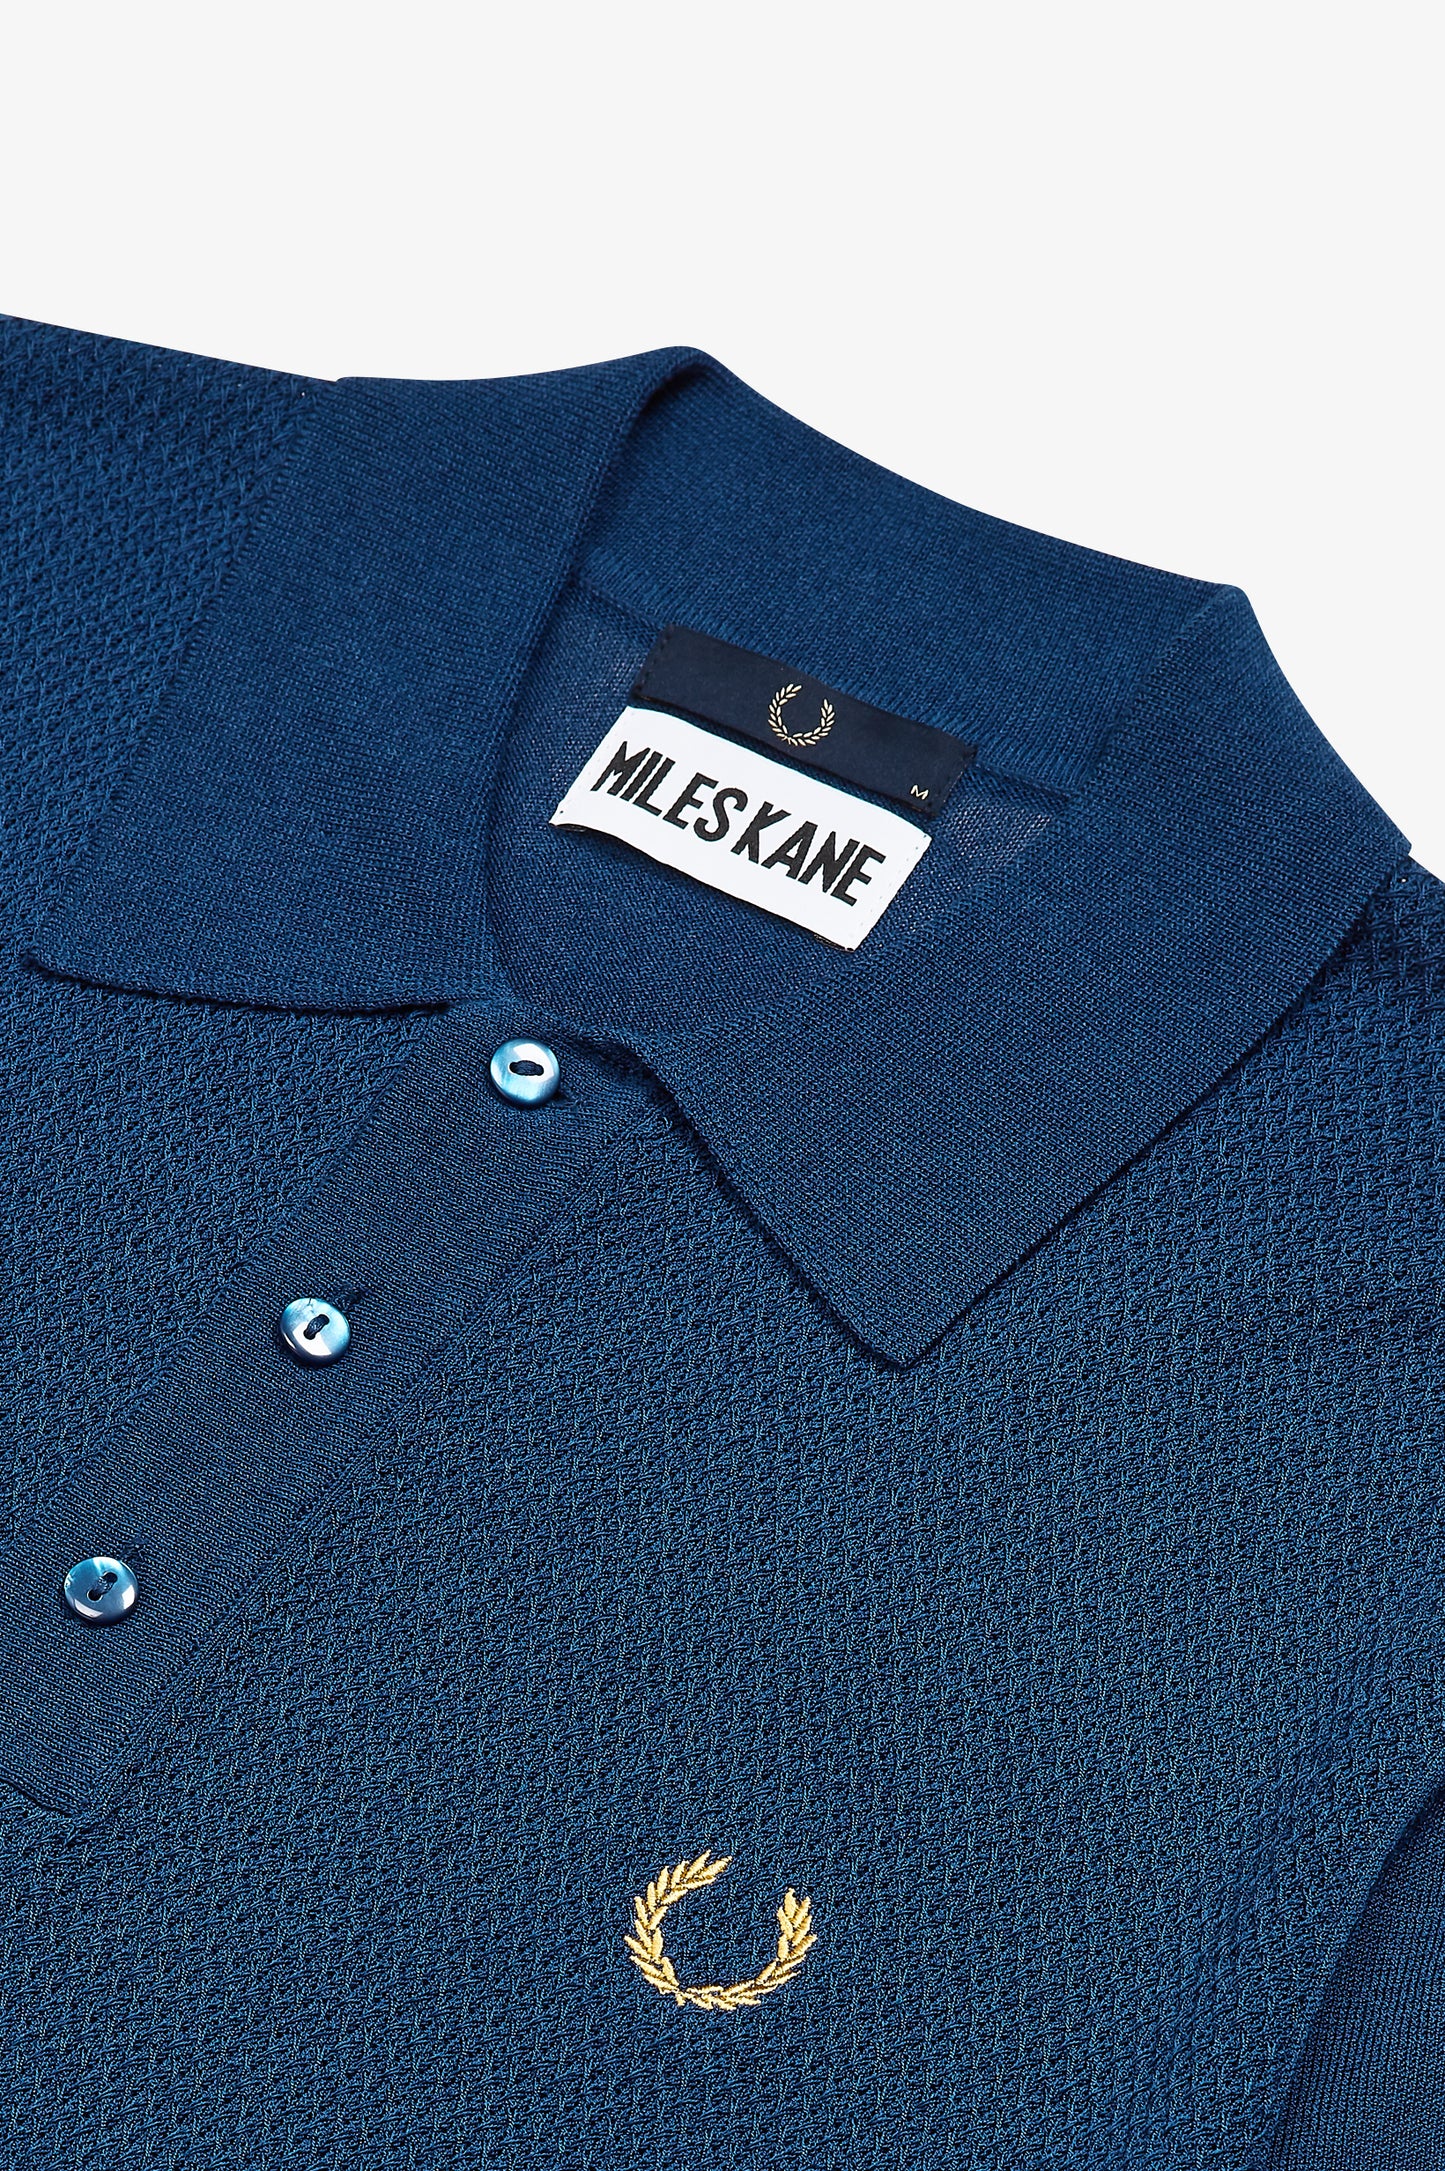 Textured Panel Knitted Shirt by Miles Kane (Deep Marine)